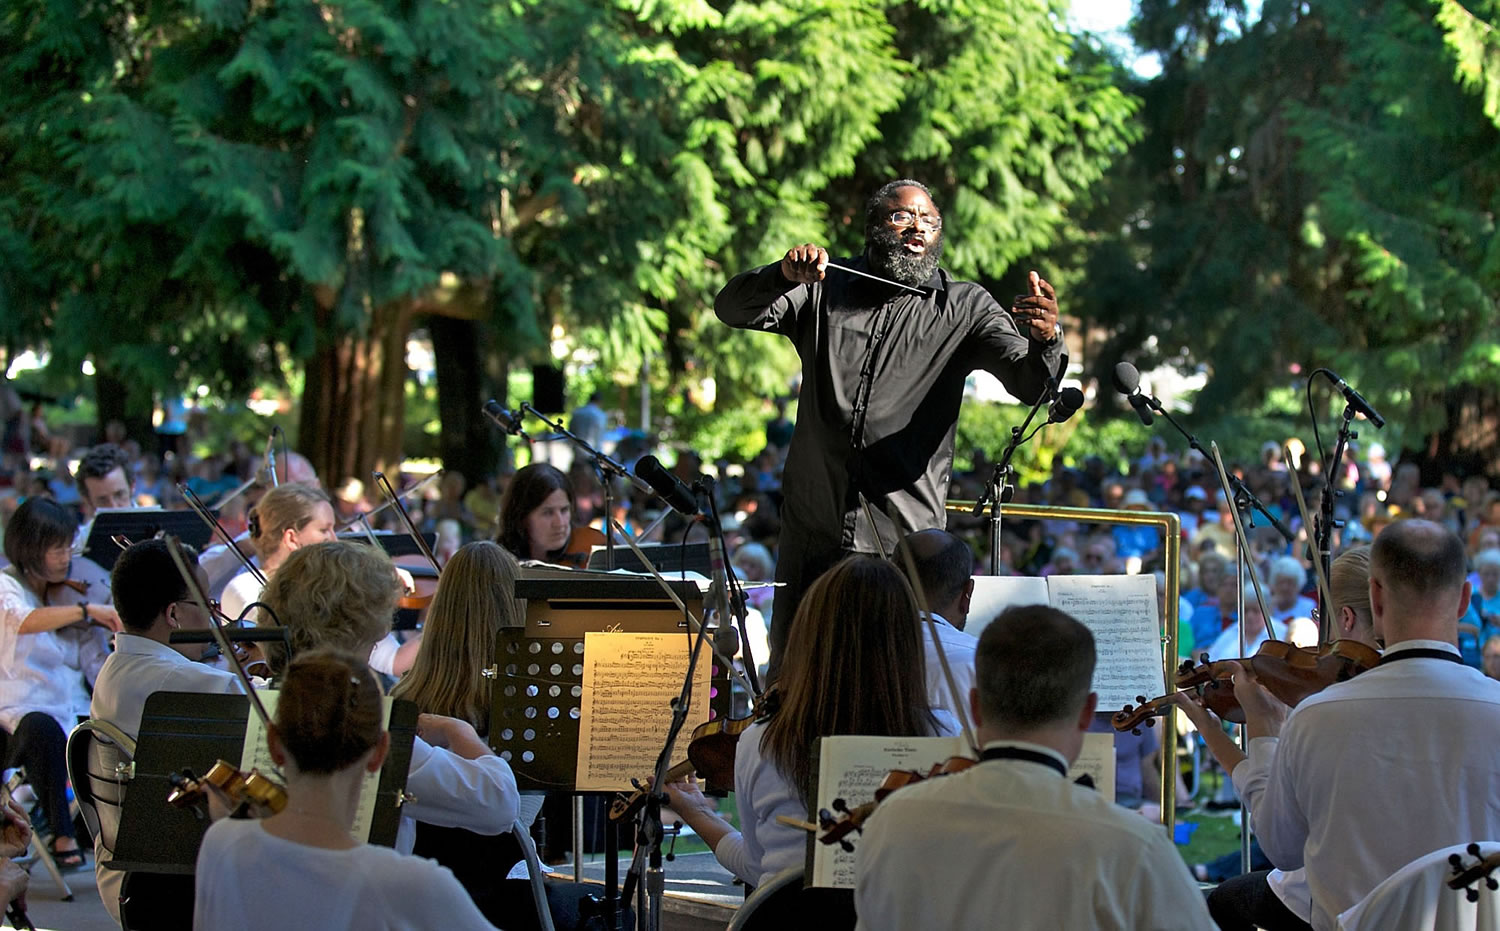 Awadagin Pratt conducts the Vancouver Symphony Orchestra during a free concert at Esther Short Park on Sunday September 8, 2013.